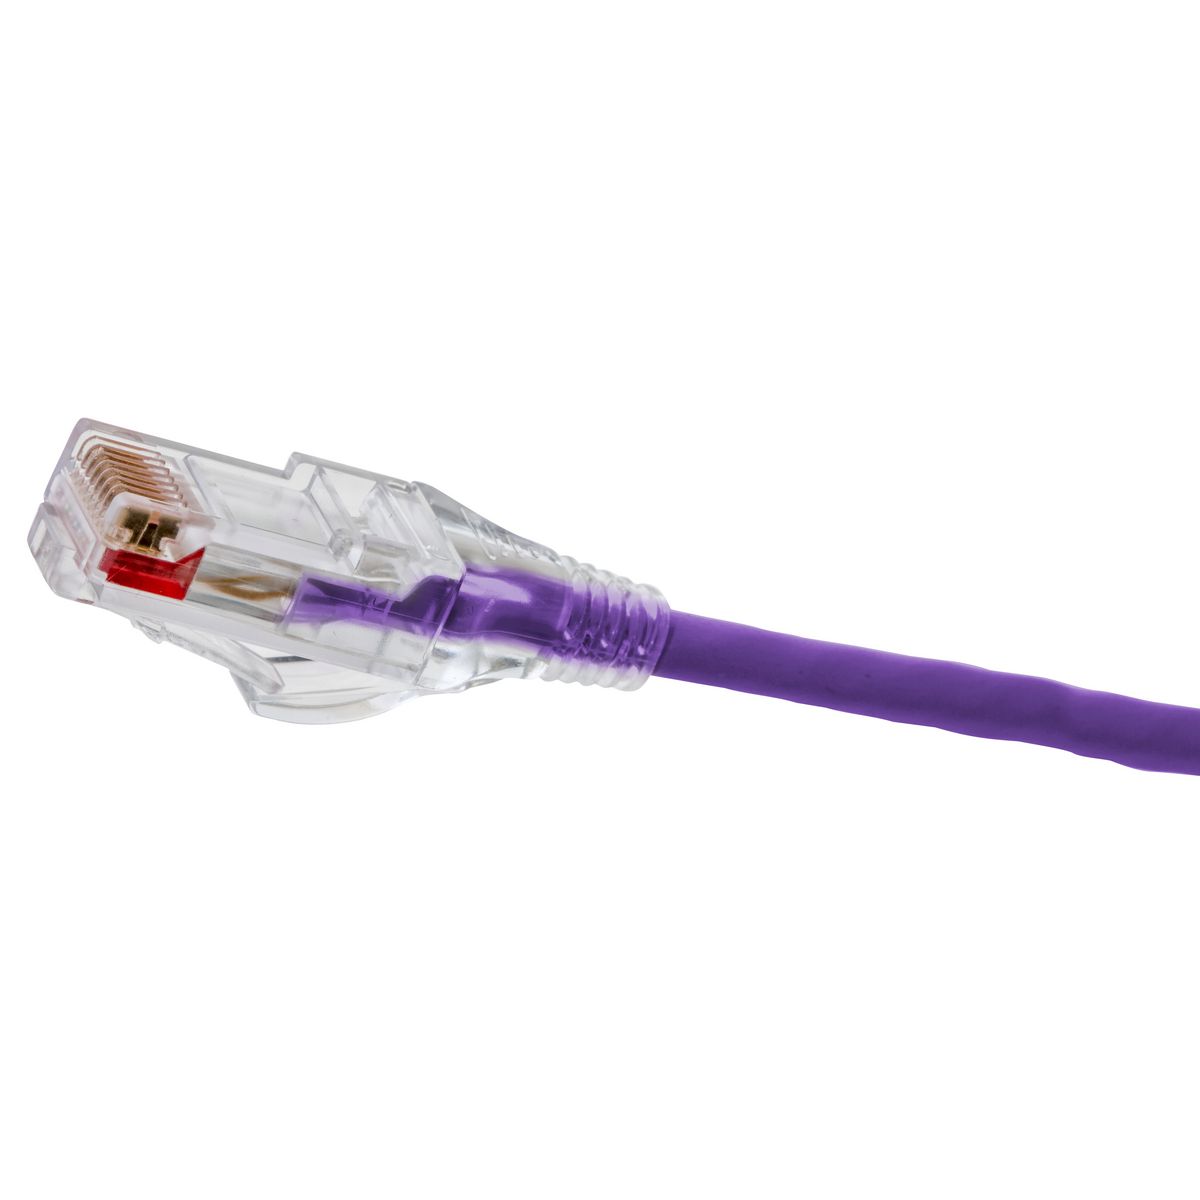 Electrical product information - P-CORD,NEXTSPEED,LOW OD,C6,SLIM,PU,7FT :  ElectricSmarts Network